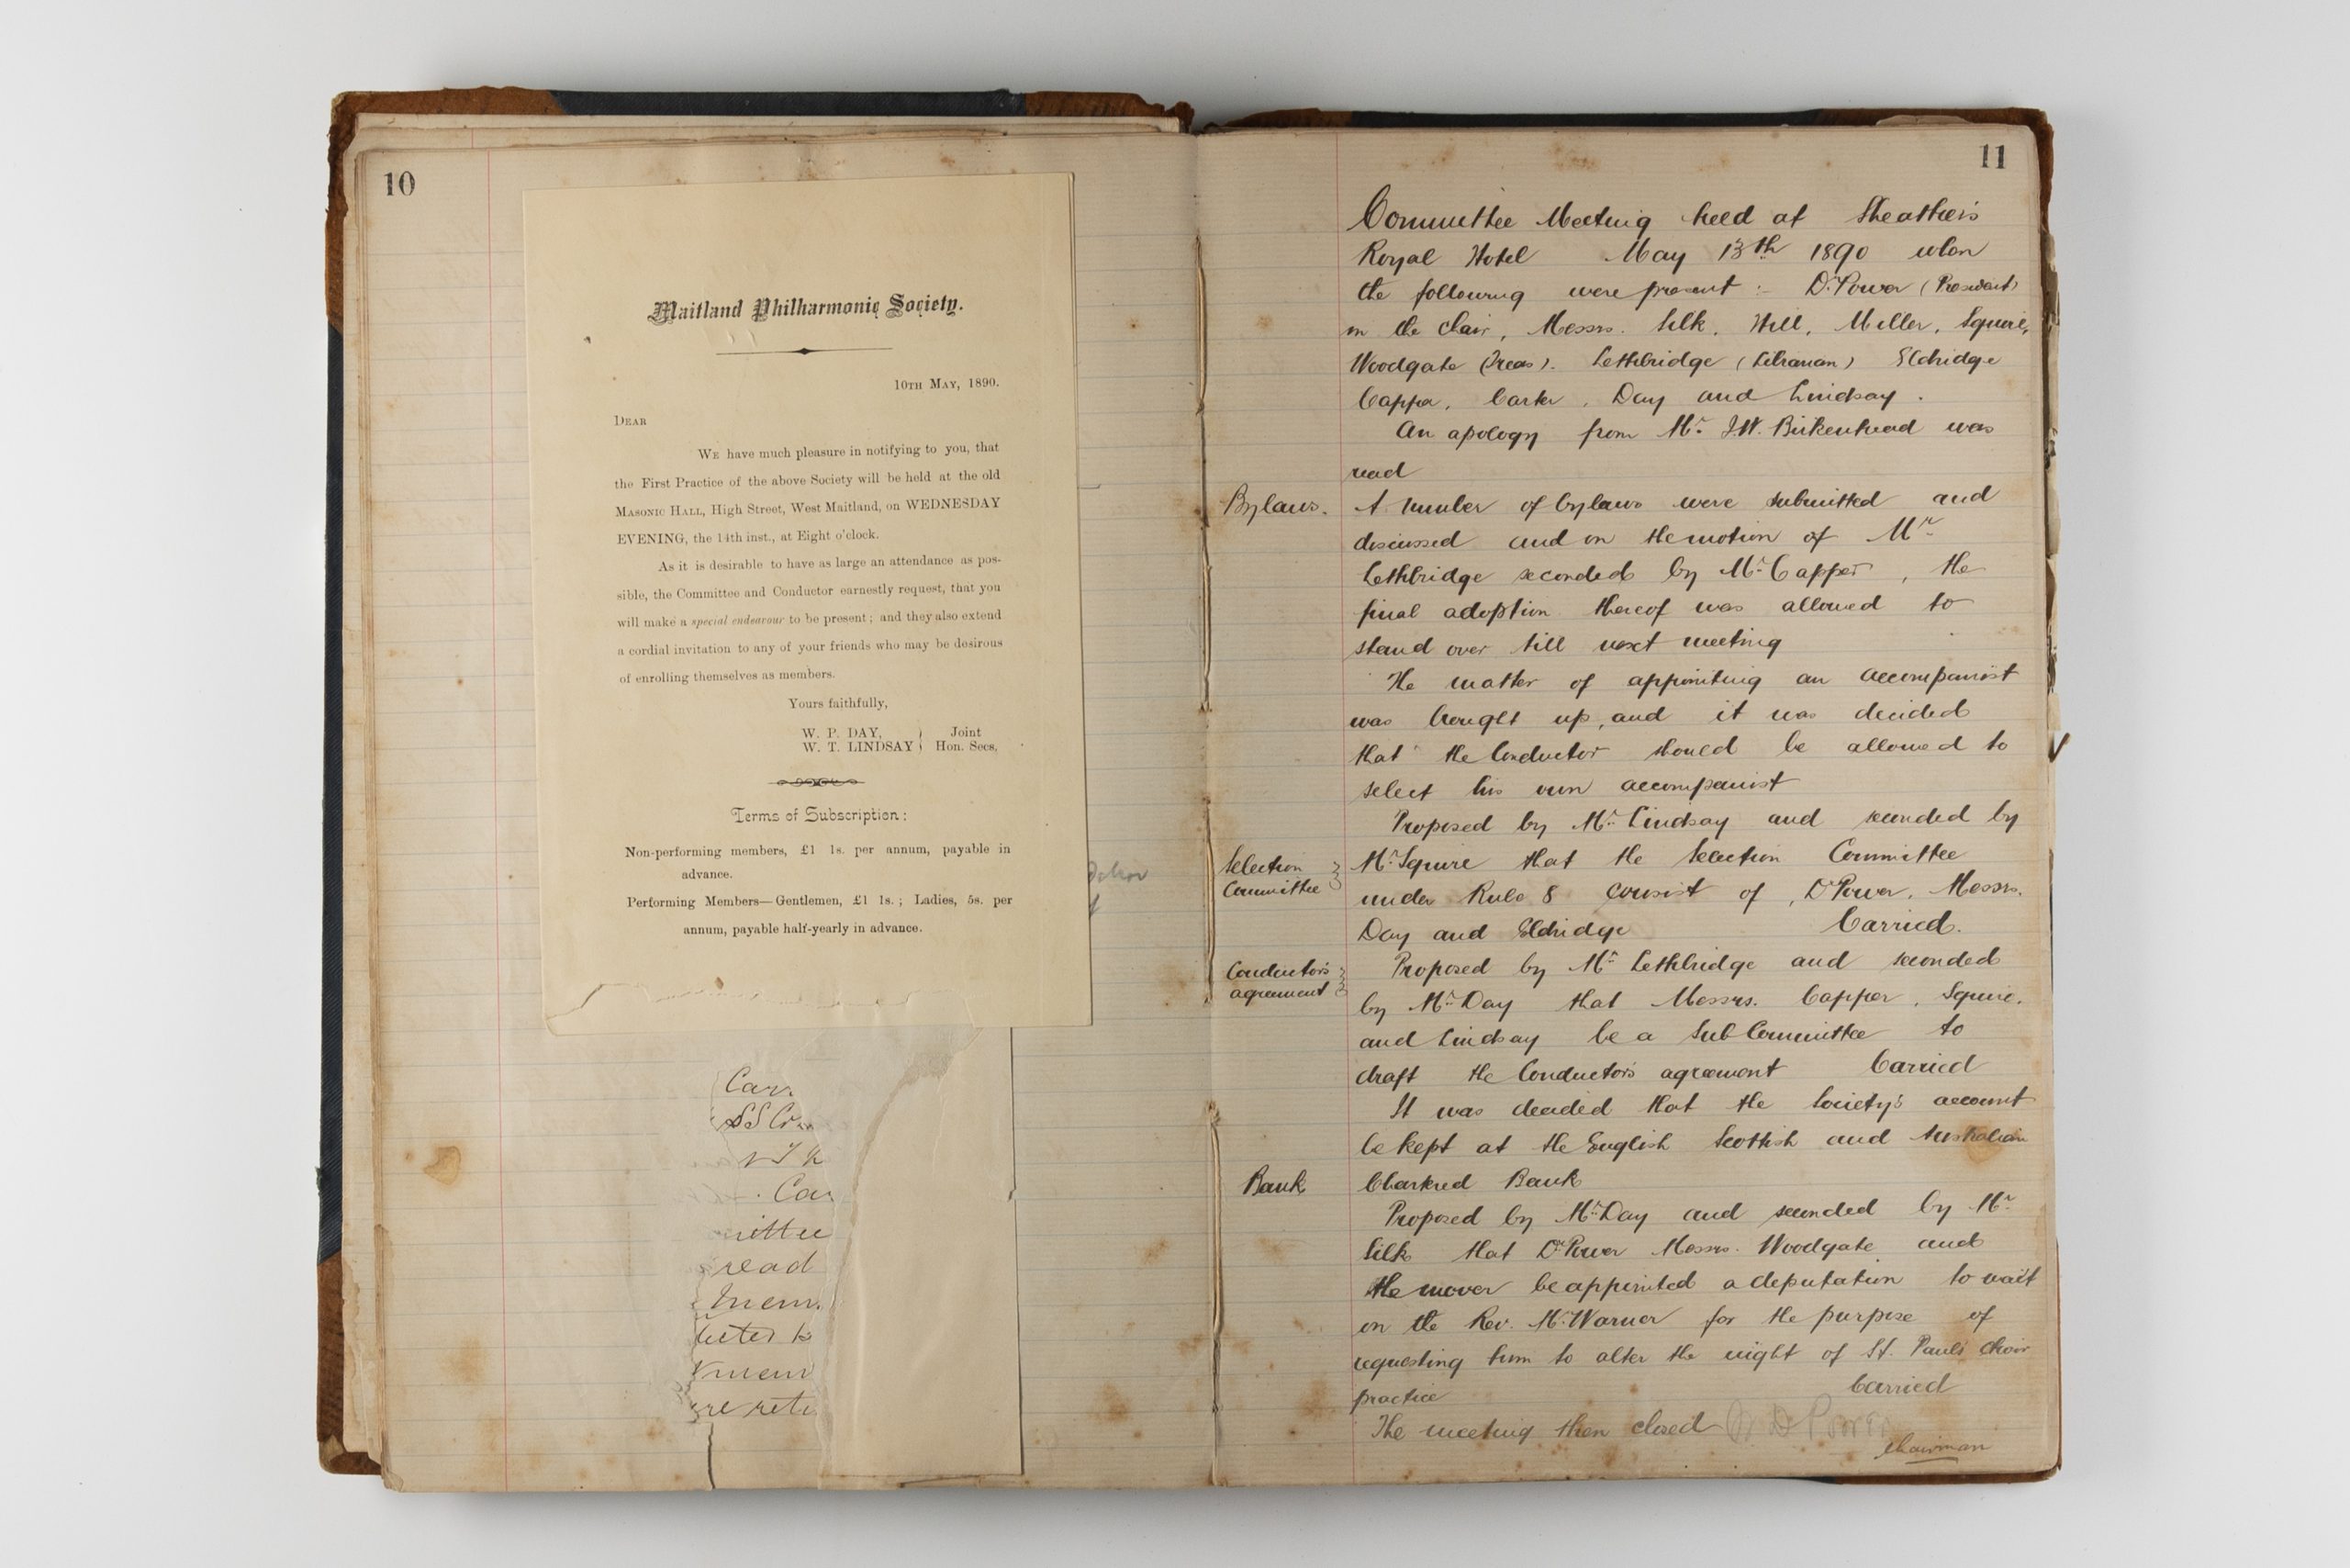 Open book with stained pages, handwritten cursive fills the right page and a letter advertising membership is stuck to the left page signed by W.P. Day and W.T. Lindsay